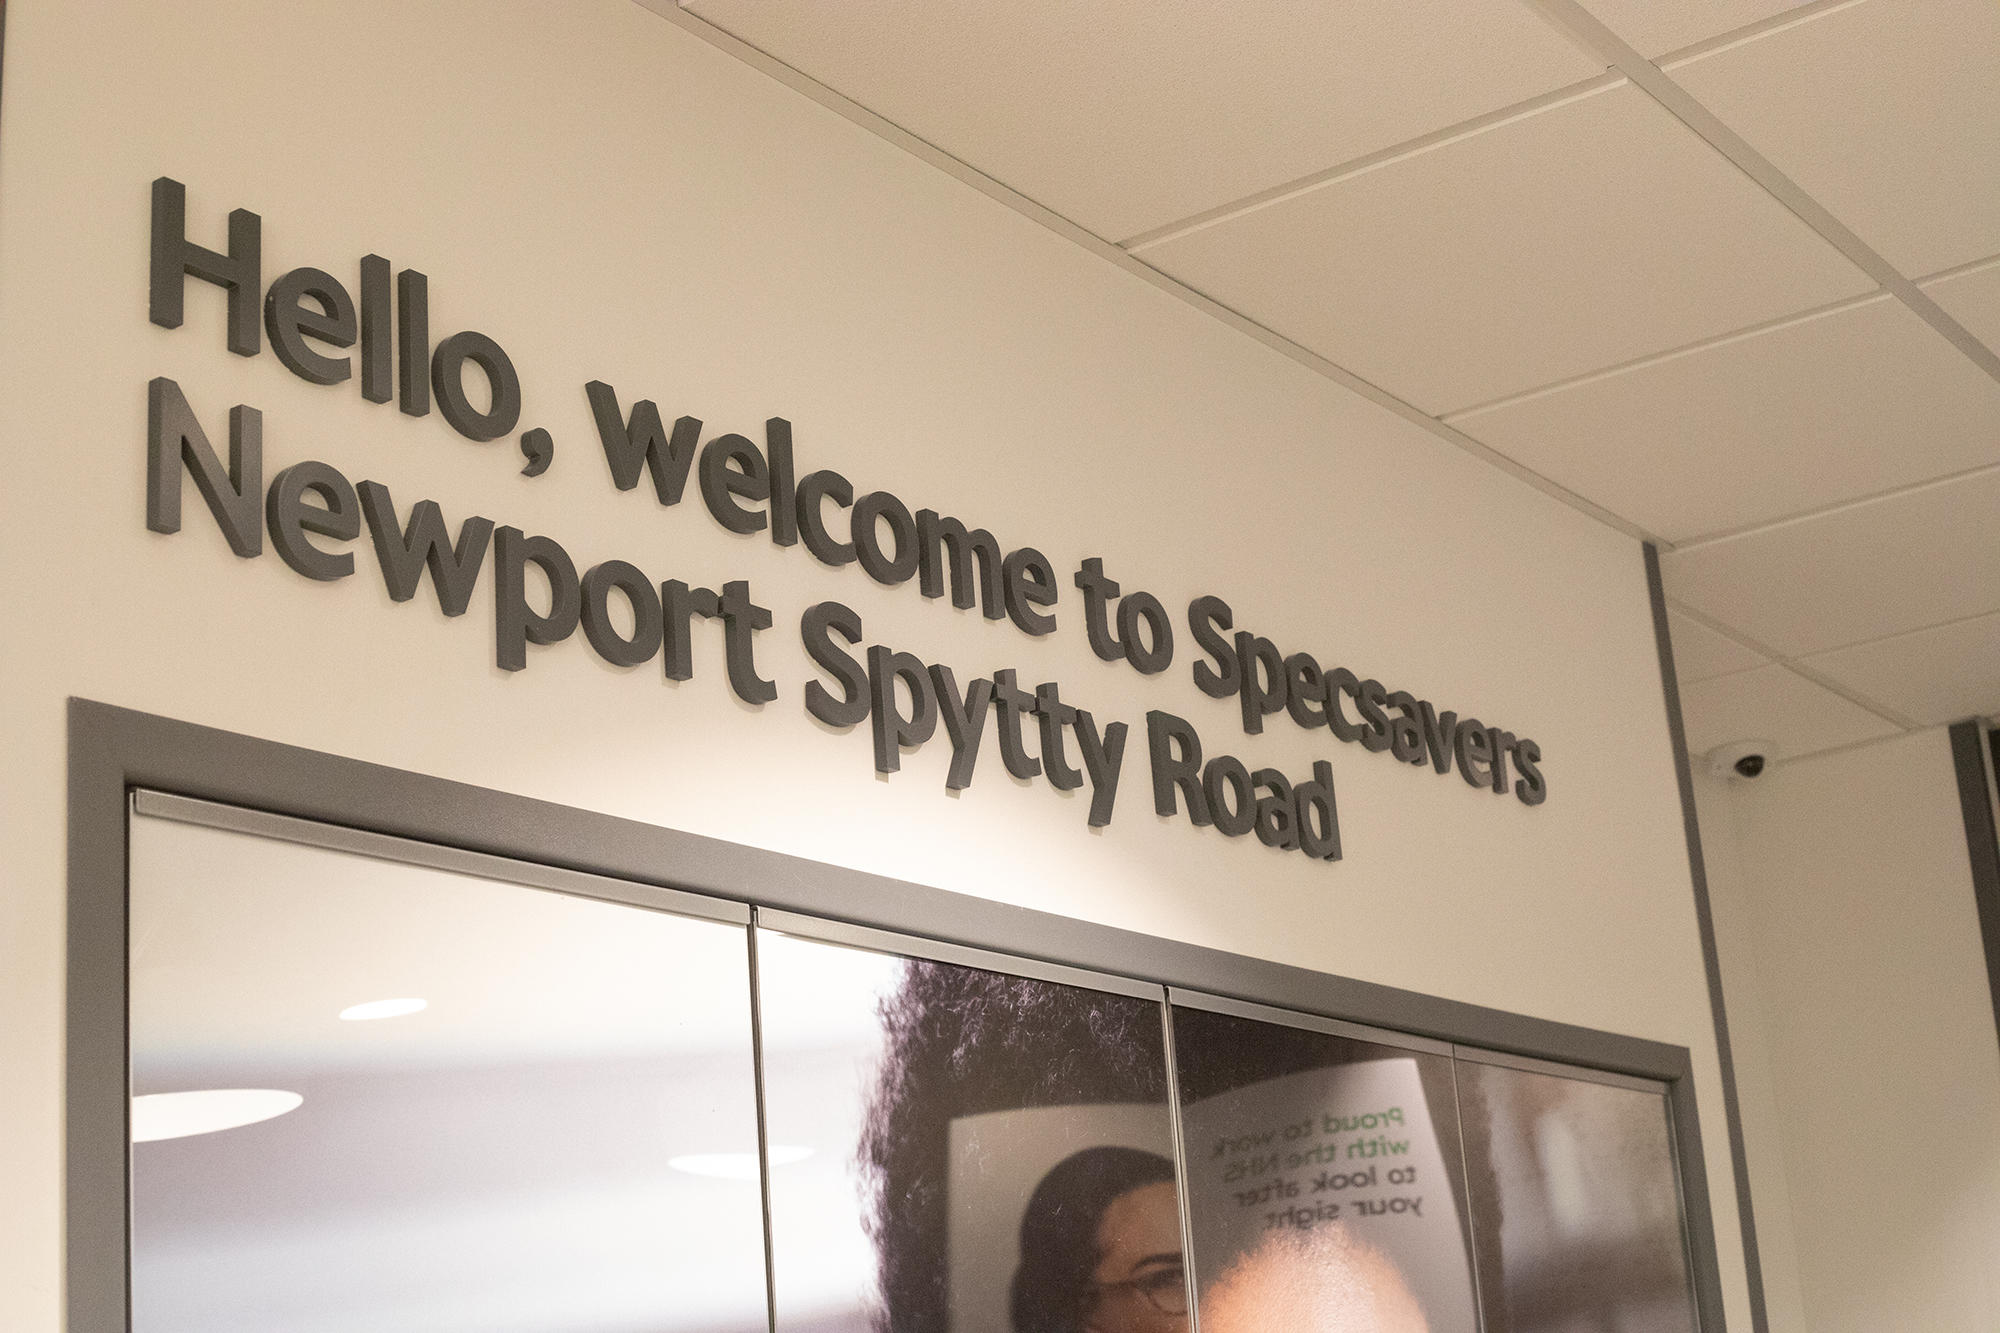 Images Specsavers Opticians and Audiologists - Spytty Road